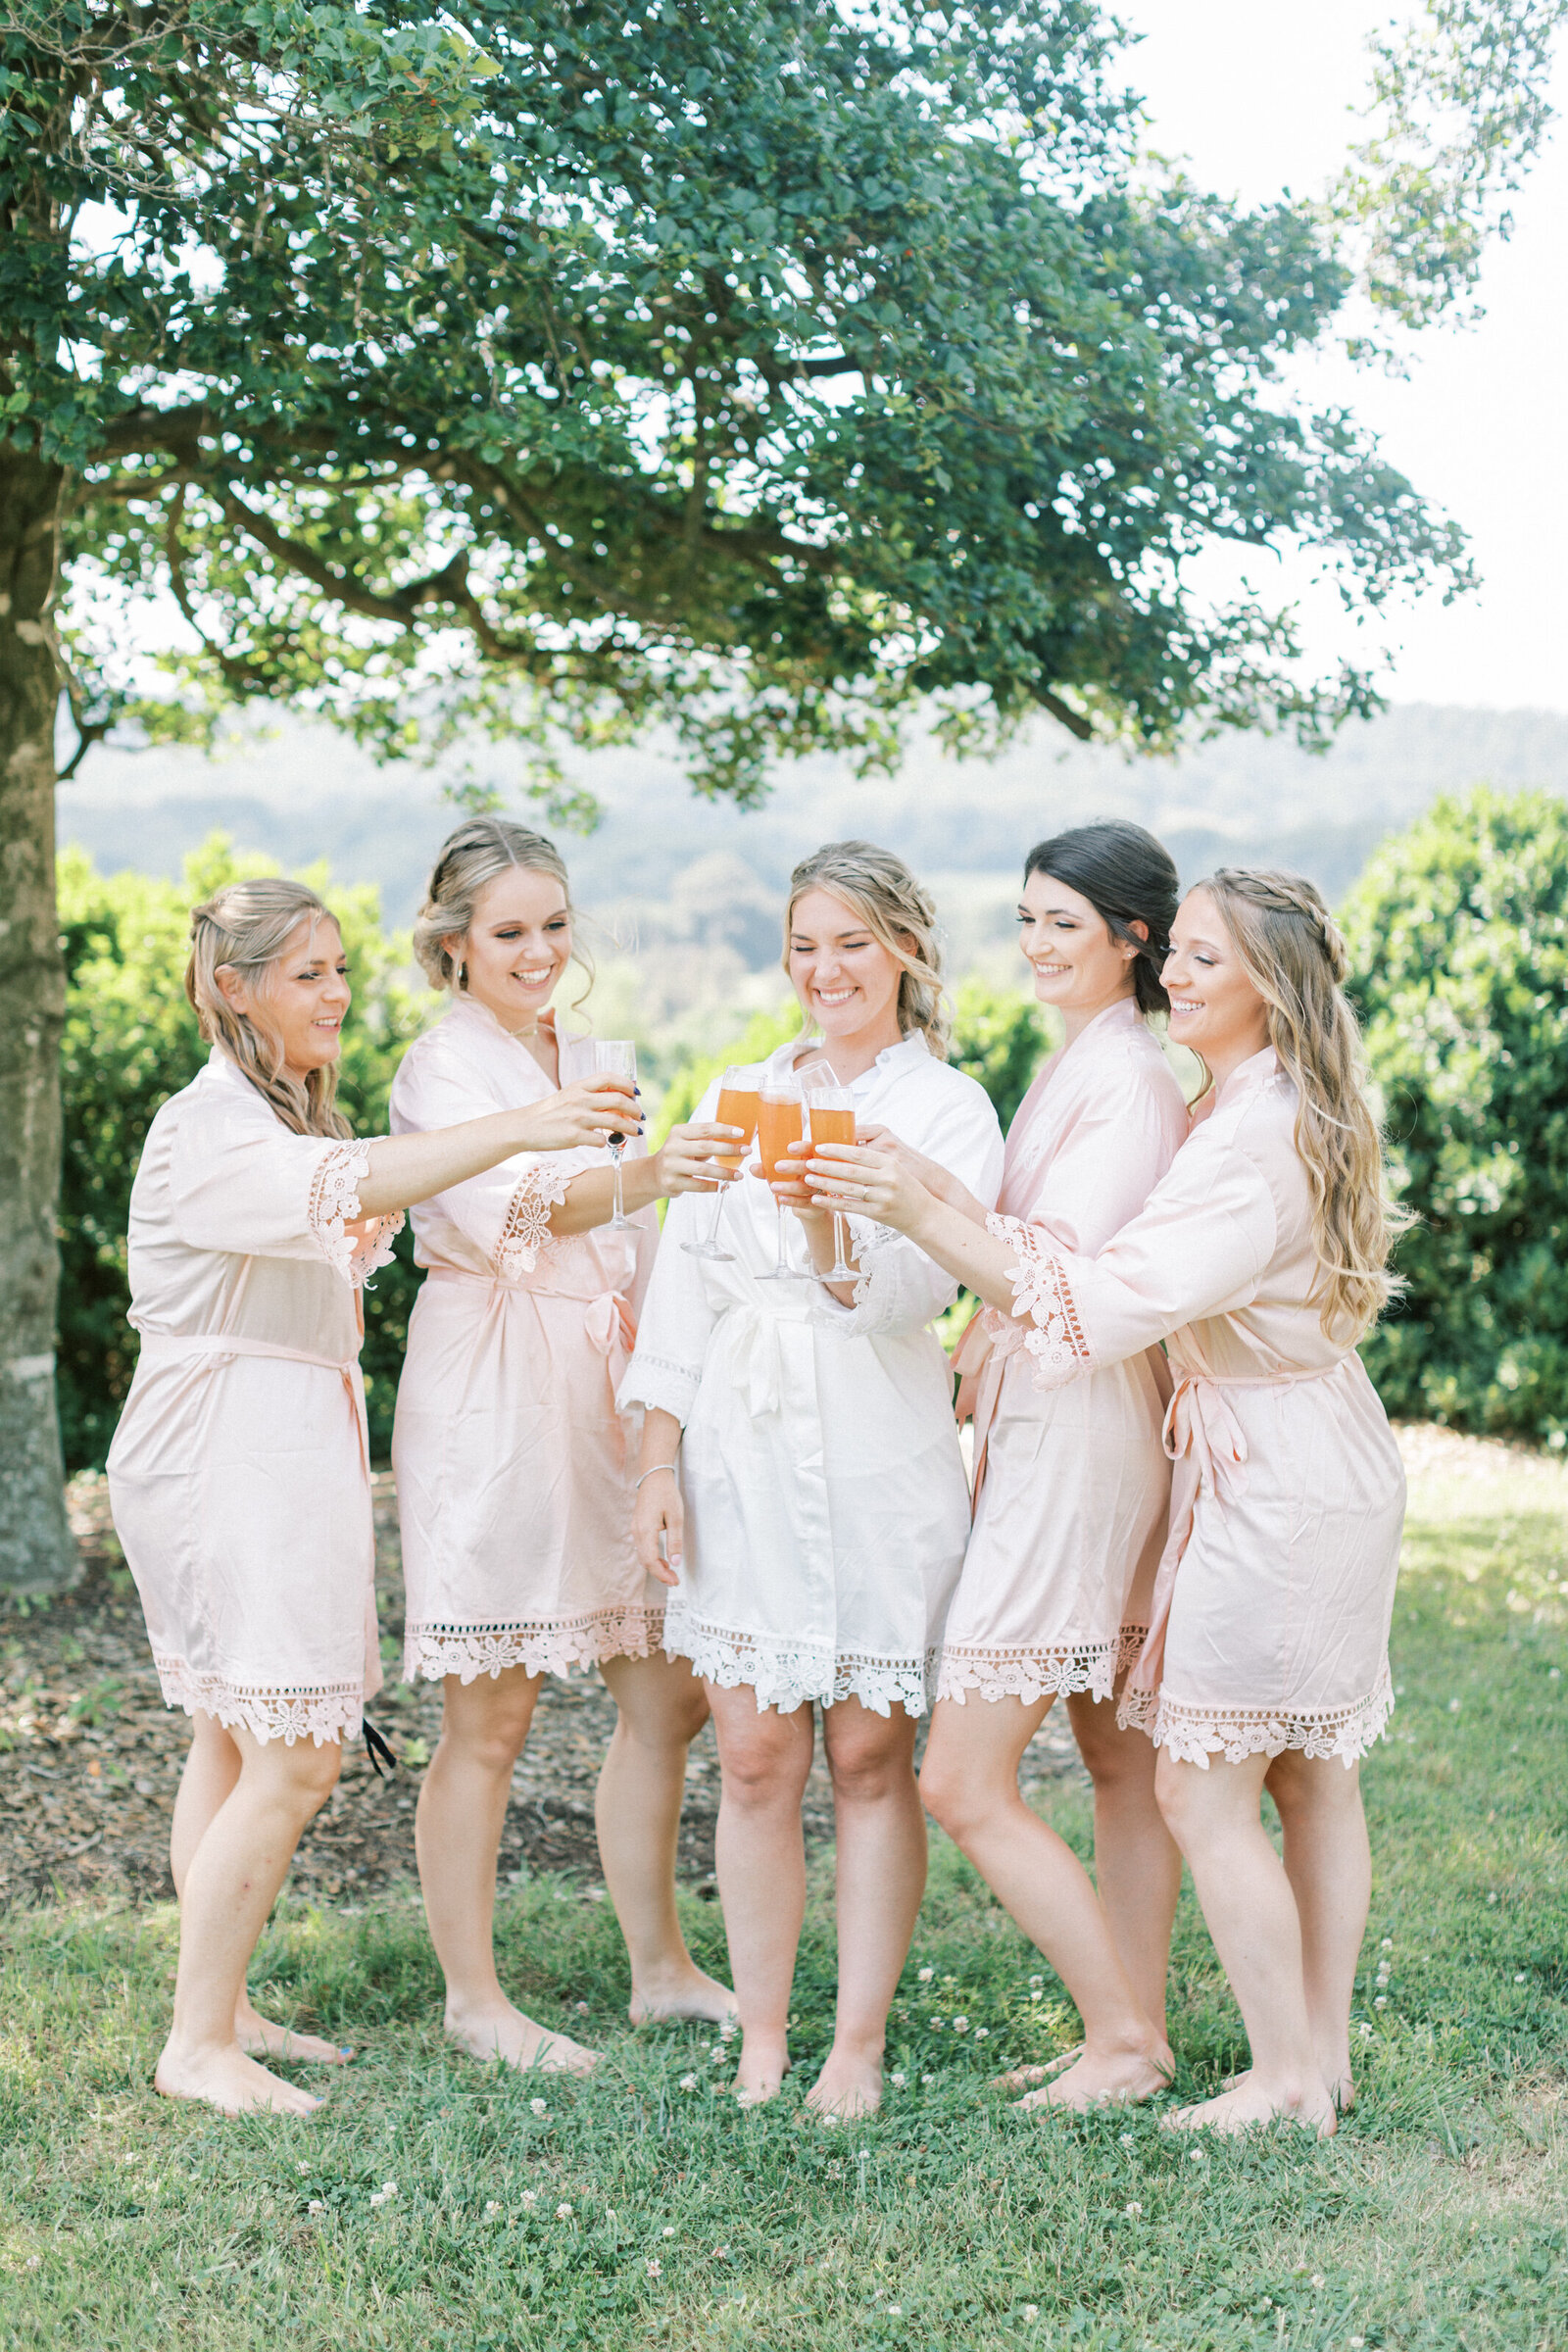 Bridesmaids all toast to the bride in their robes